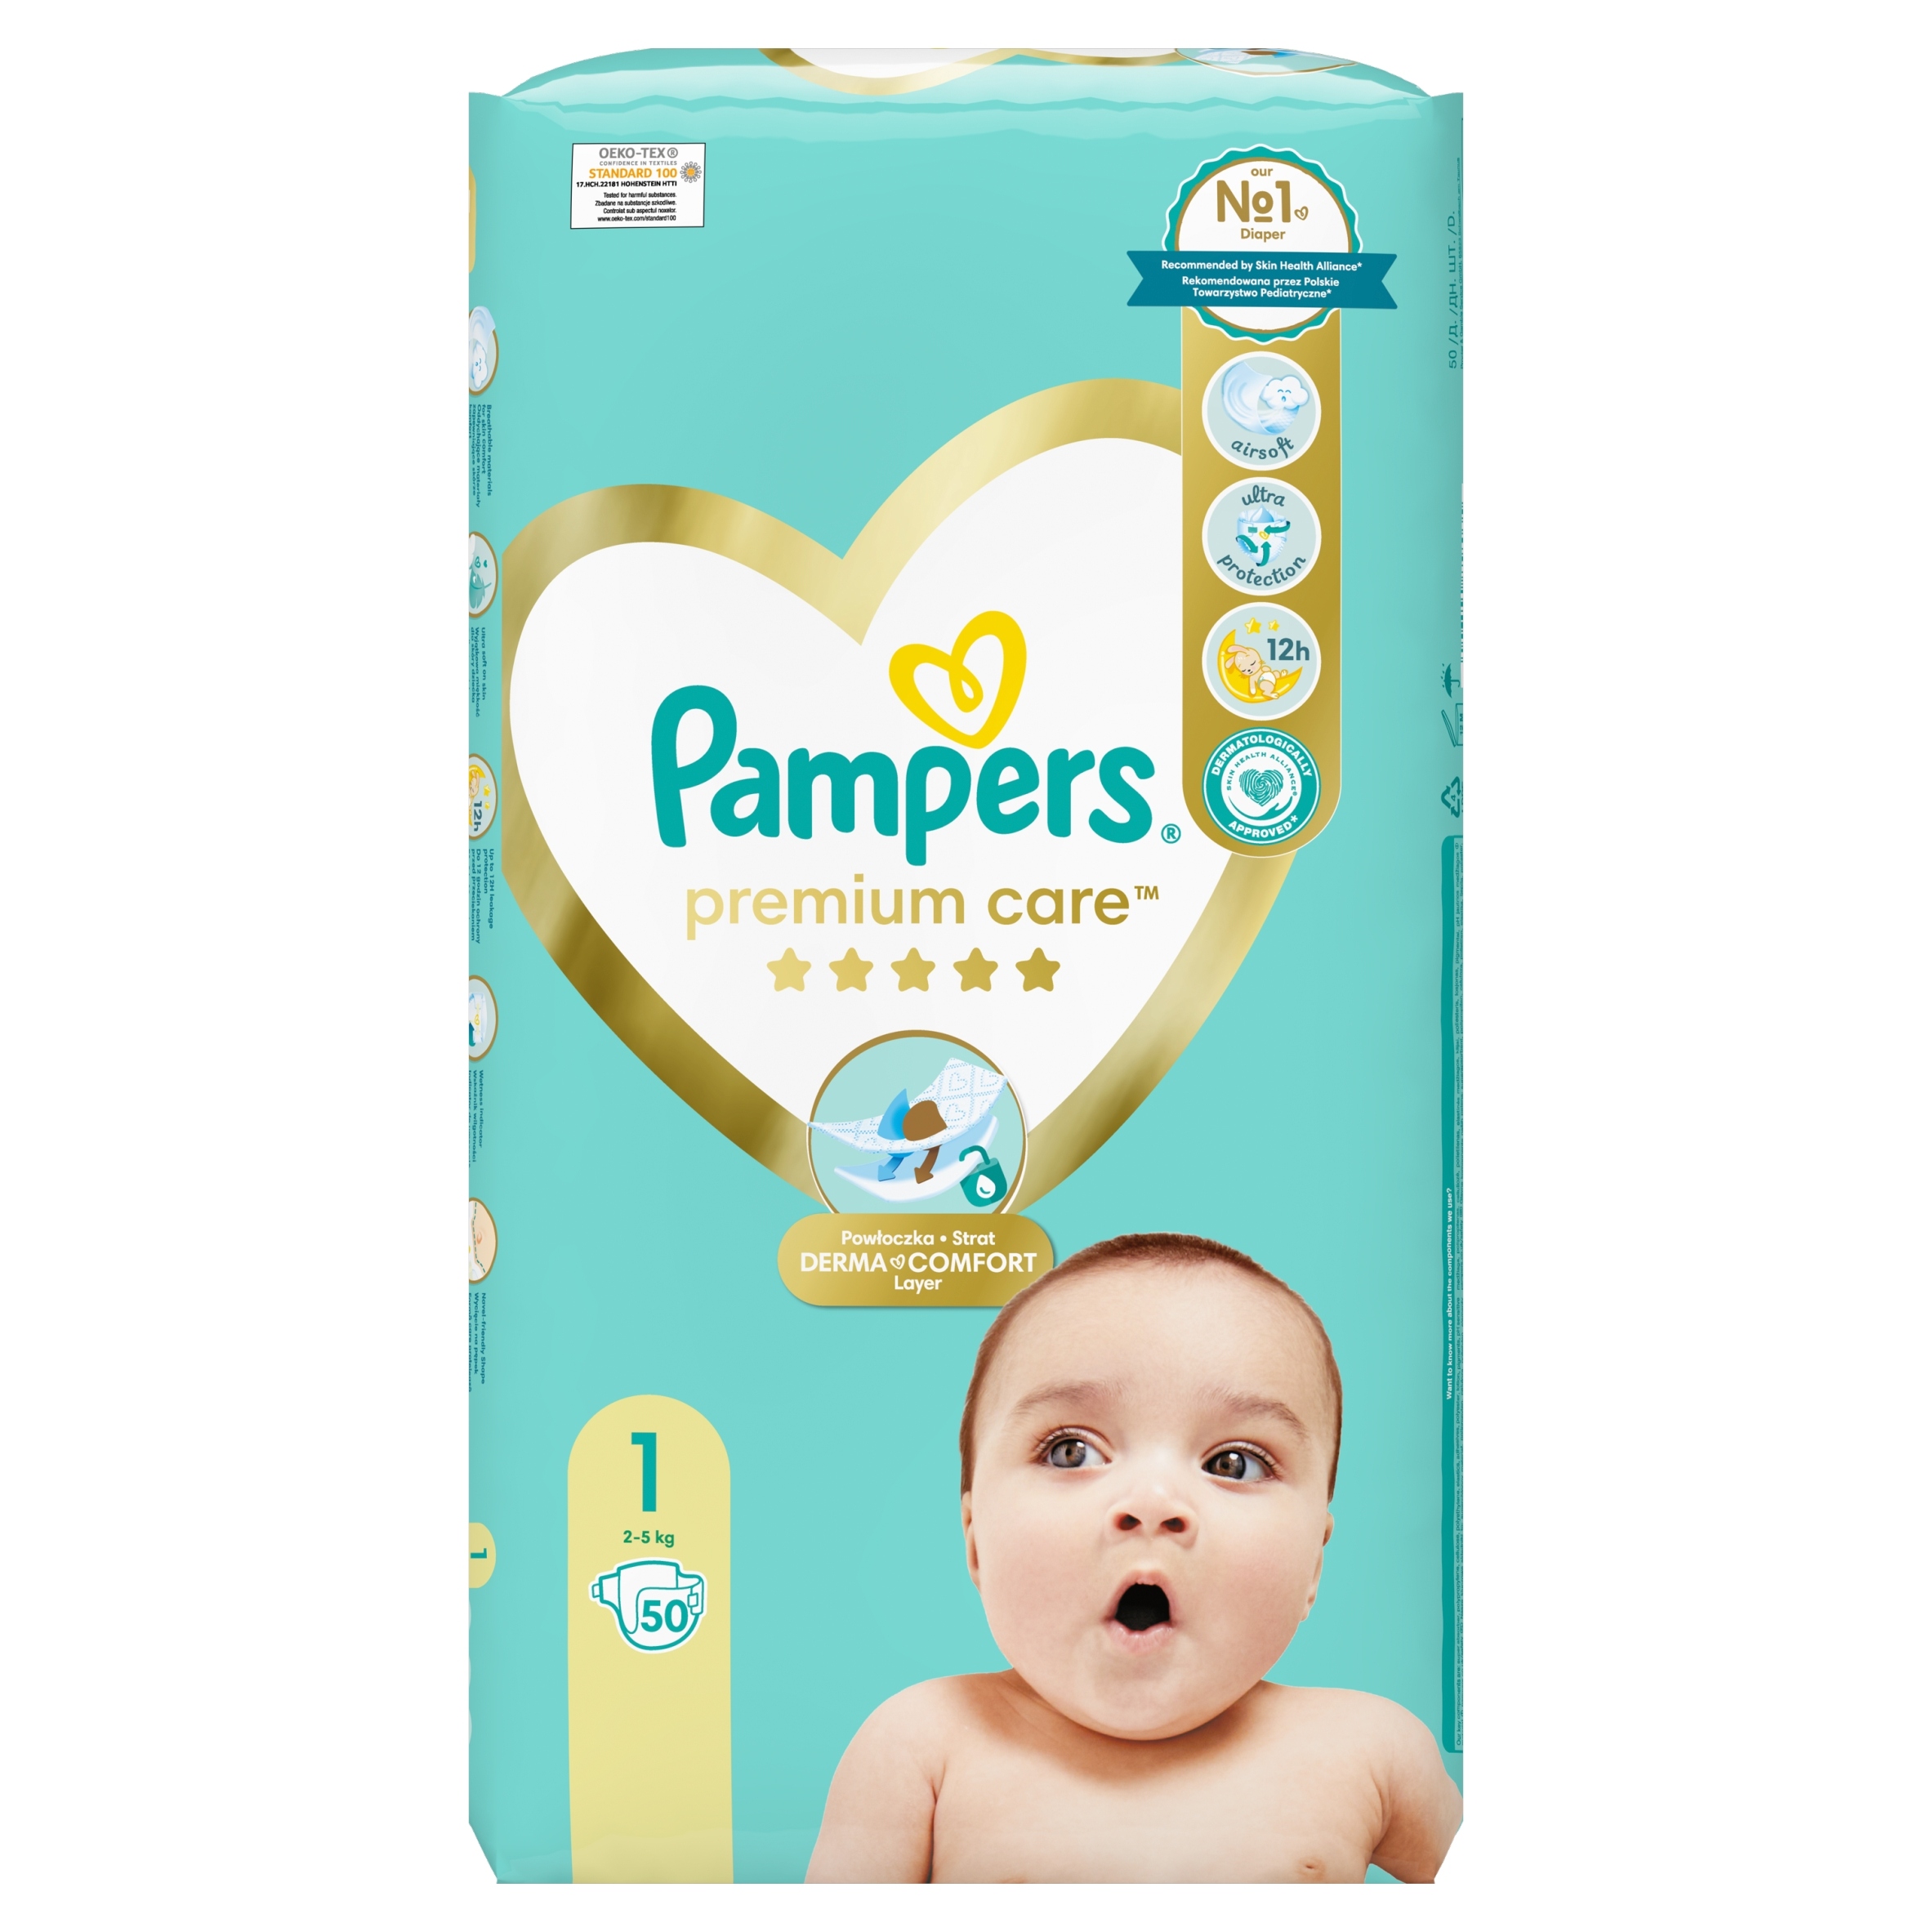 pampers strona producenta